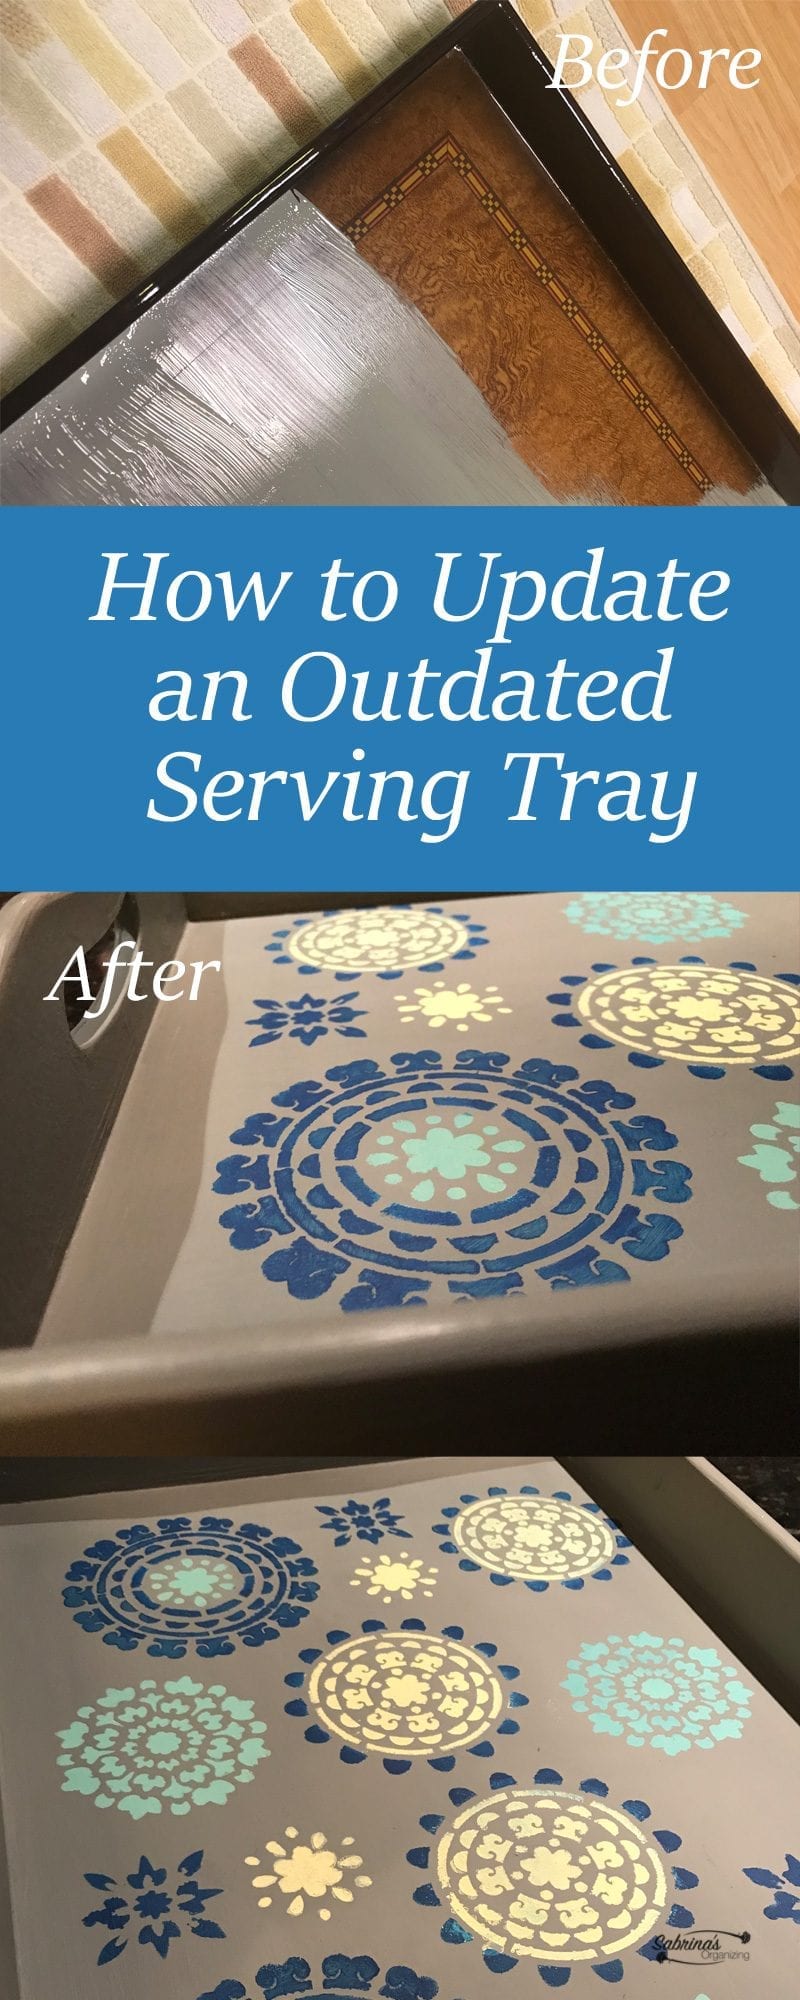 How to Update an Outdated Serving Tray